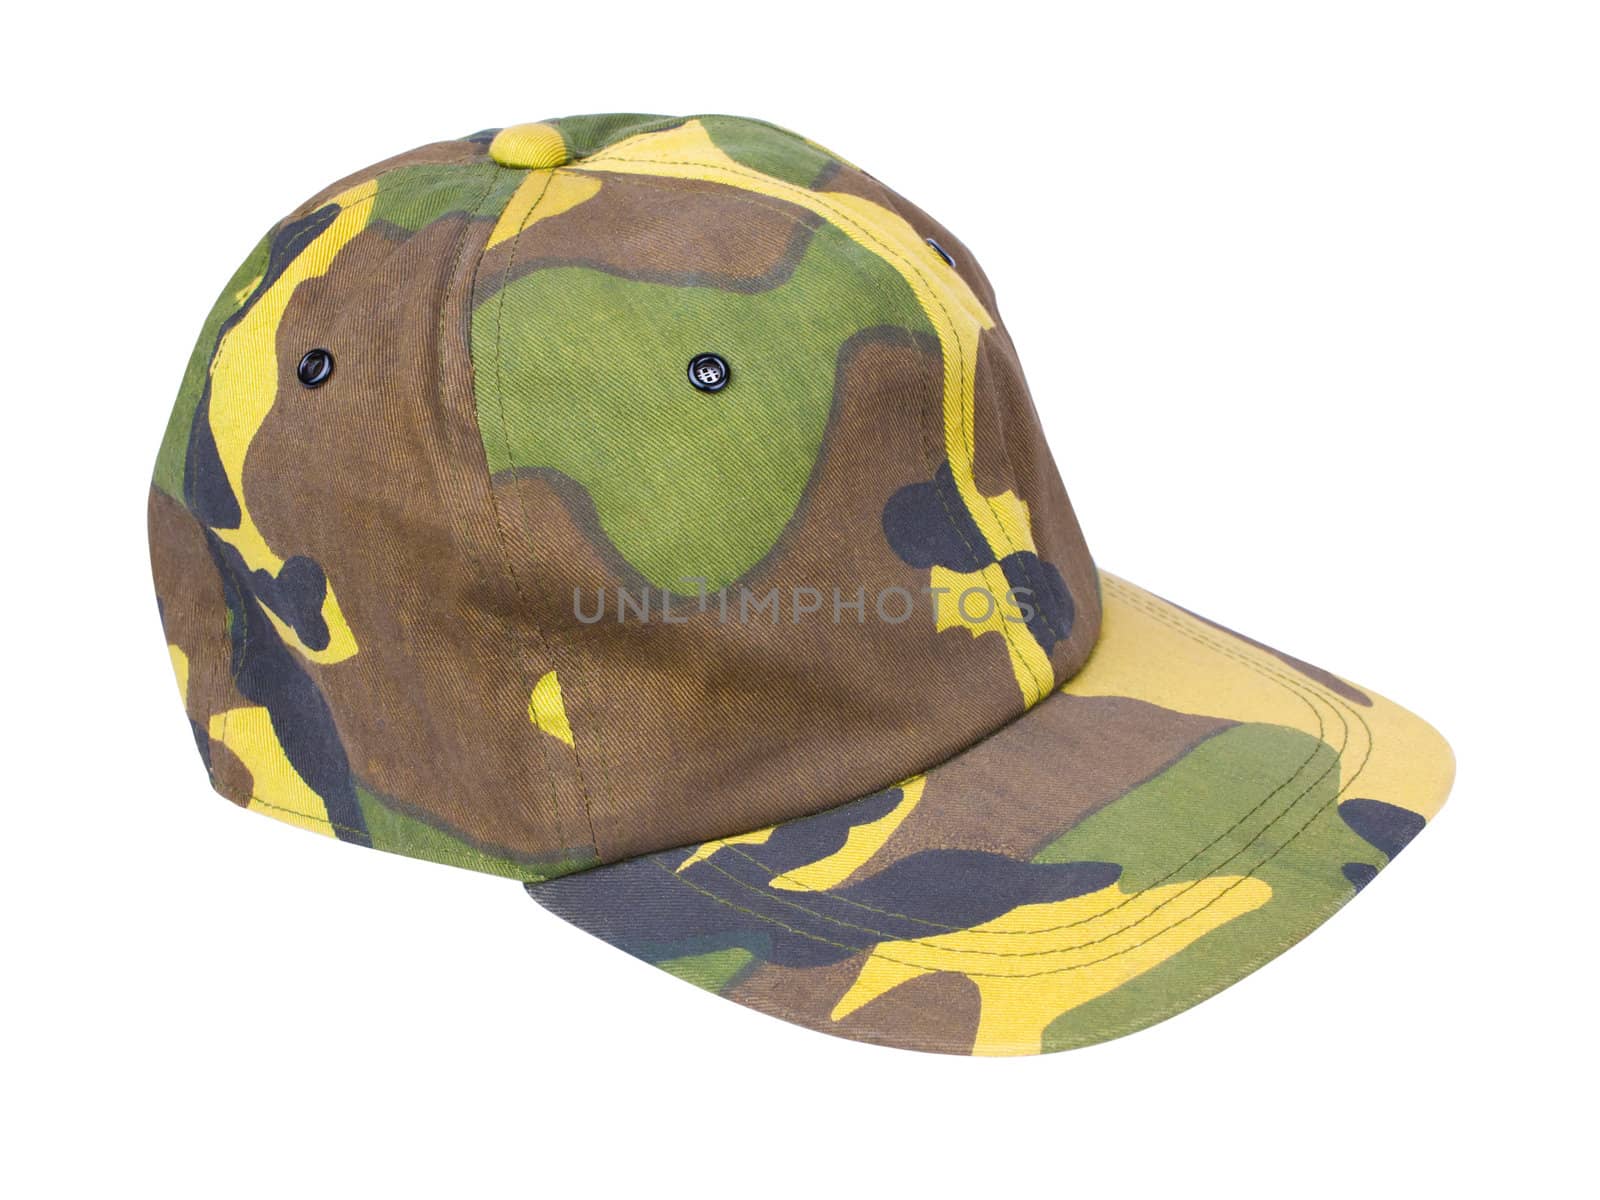 Camouflage cap by Luminis